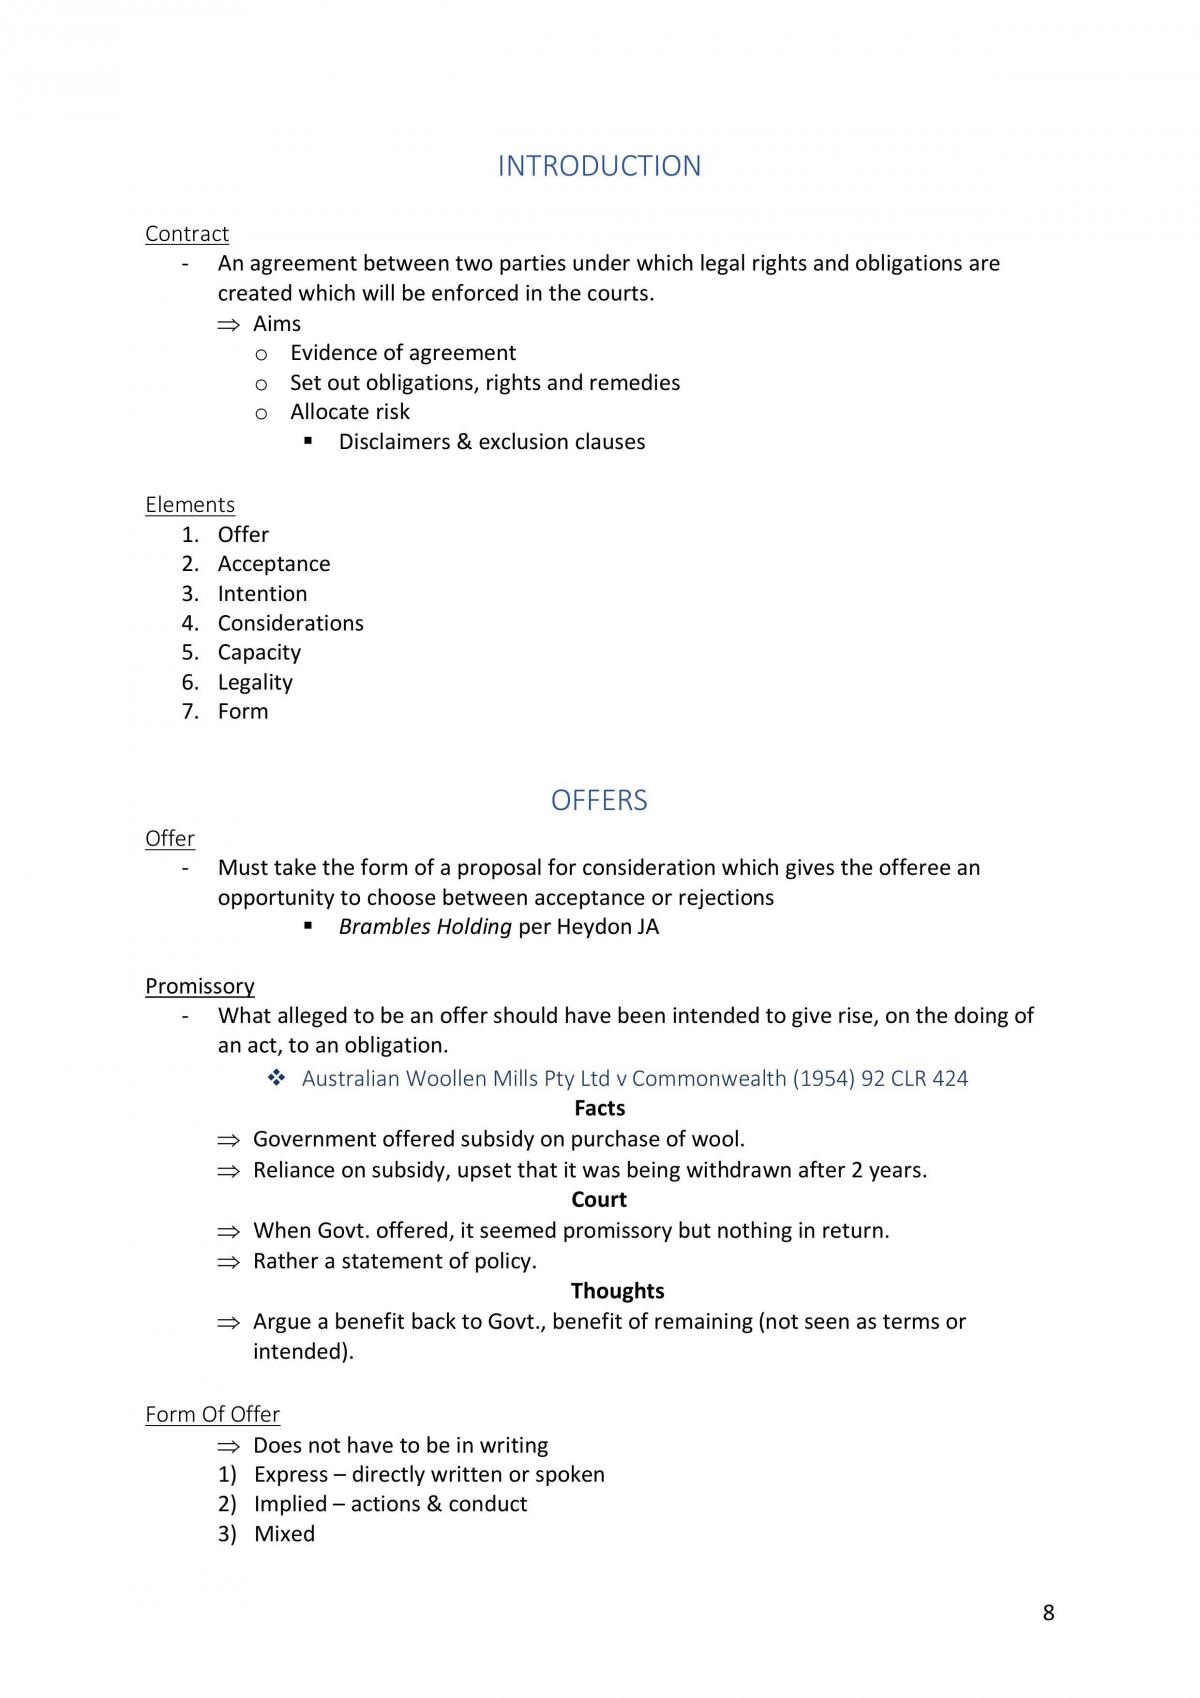 Exam Notes - Contract Law - Page 8